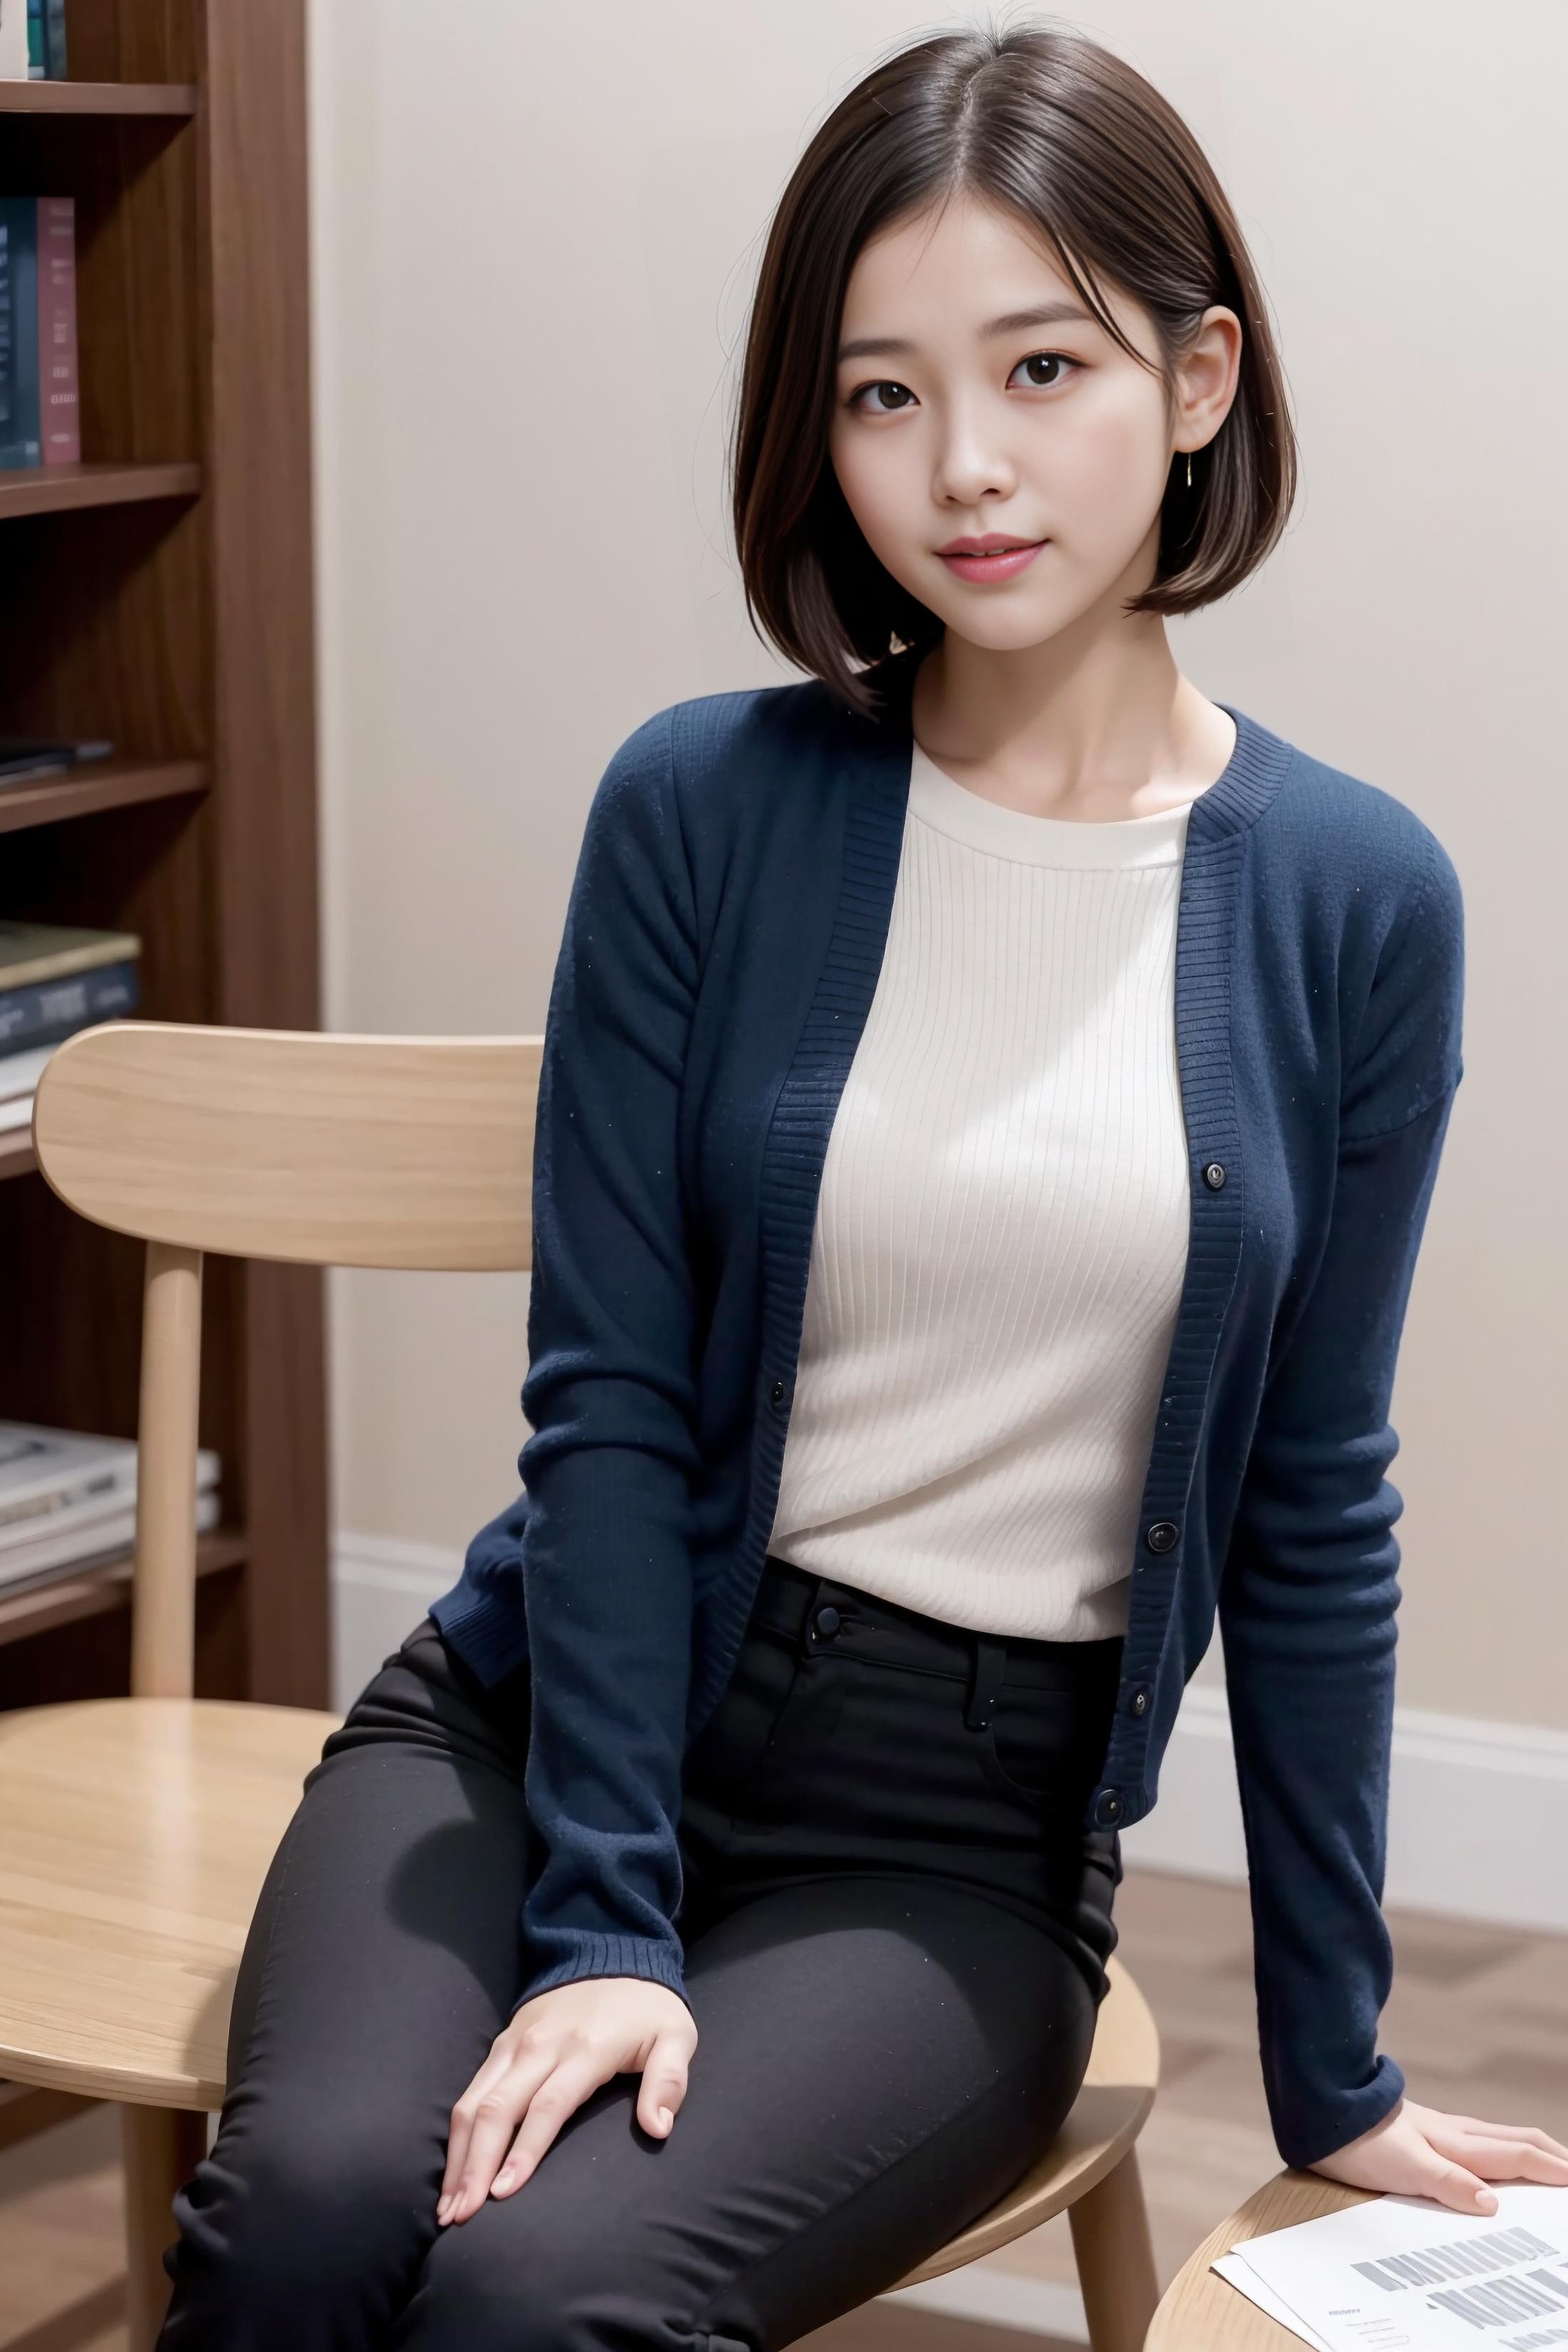 Normal Korean girl face, Chilloutmix base lora image by jet6011849